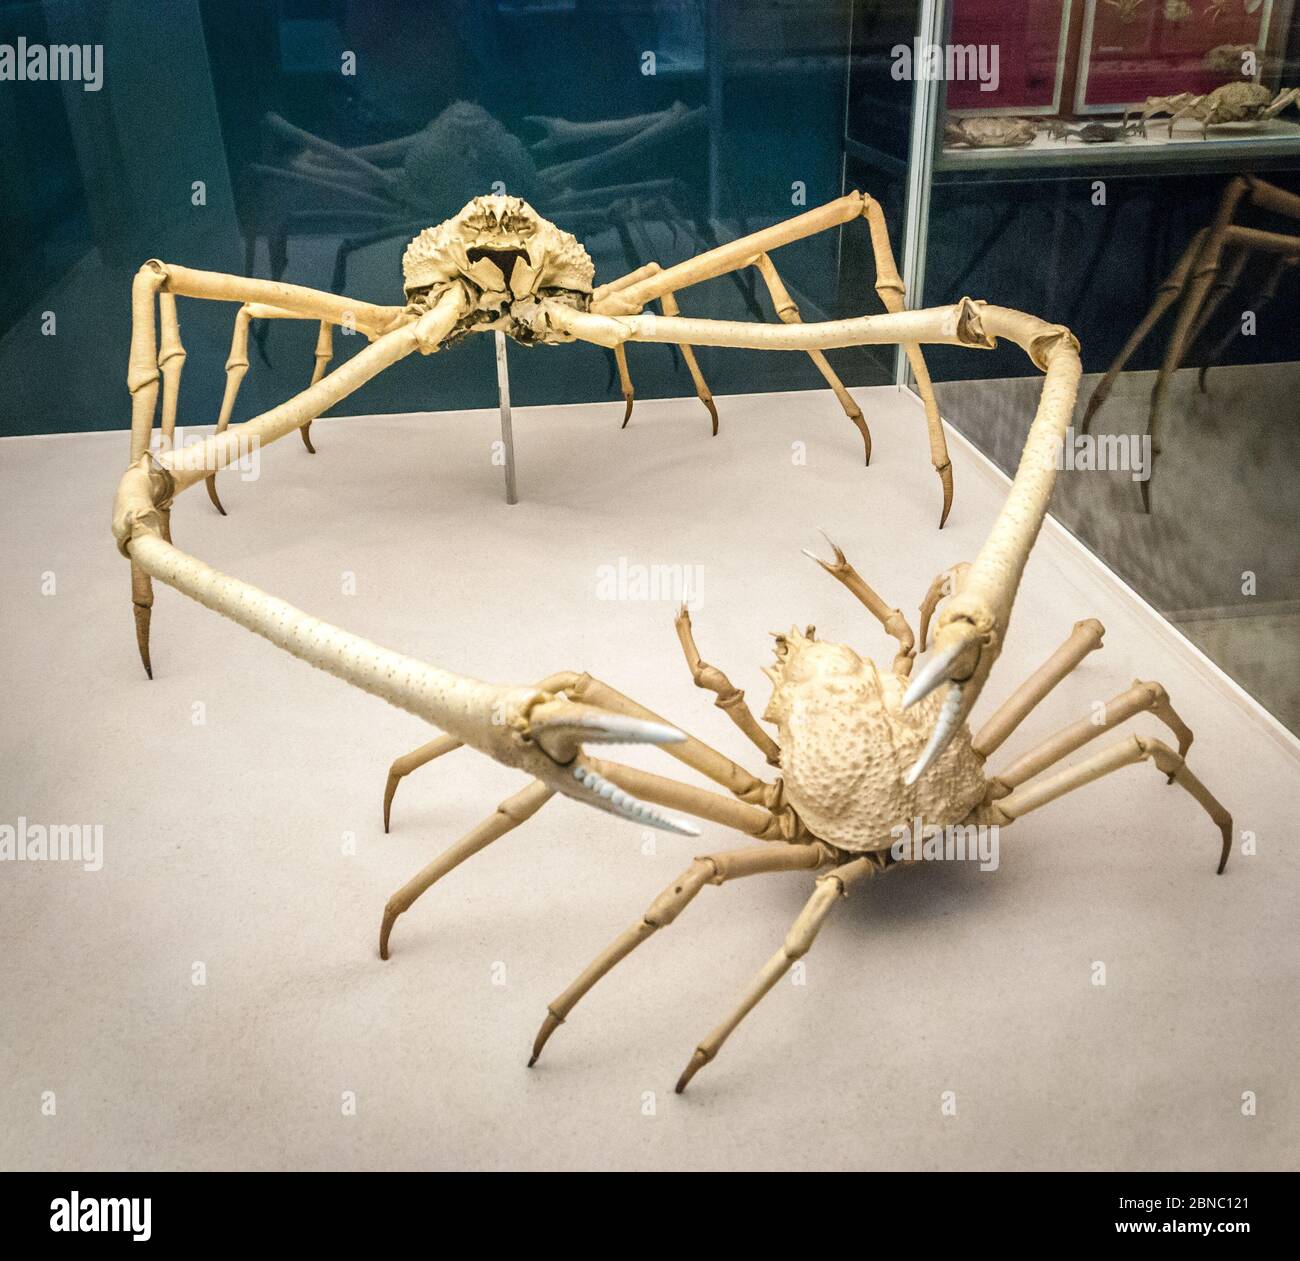 Japanese spider crab skeleton (Macrocheira kaempferi). Is a species of marine crab that lives in the waters around Japan. It has the largest leg span Stock Photo